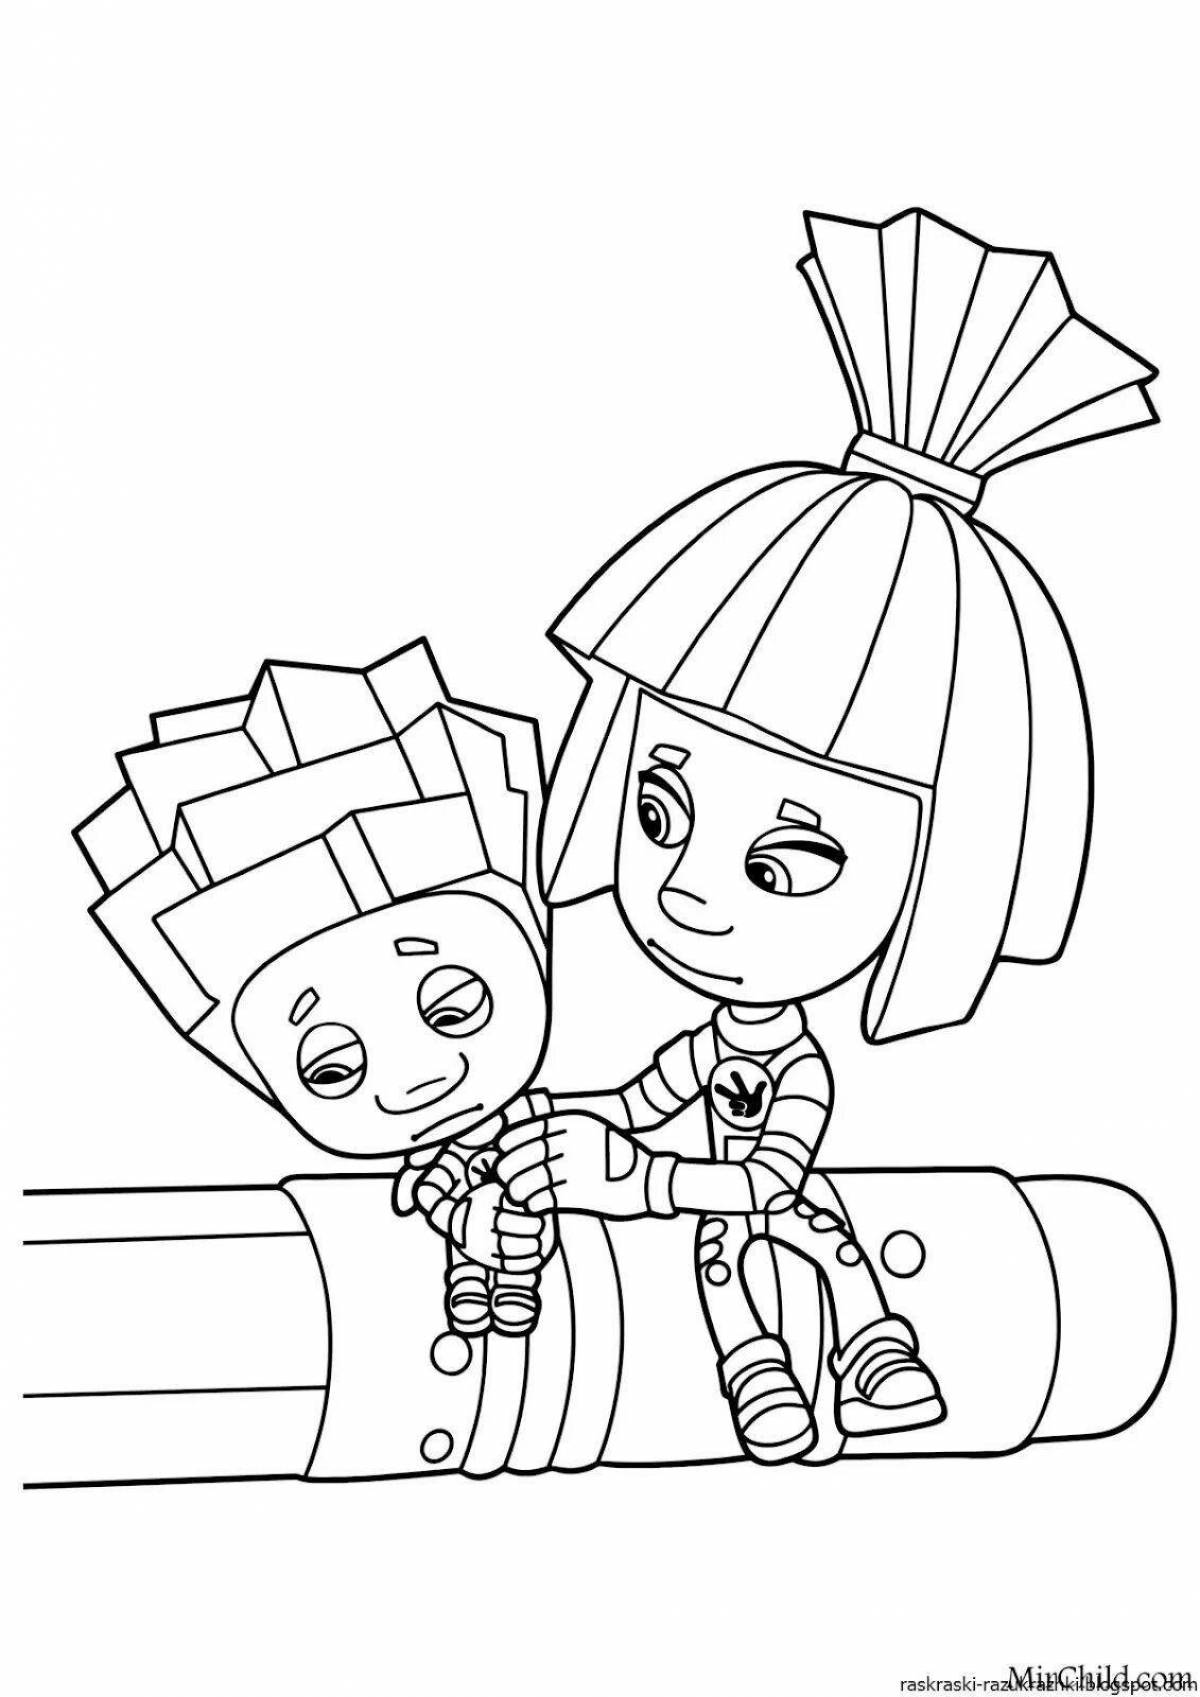 Exciting fixies coloring pages for preschoolers